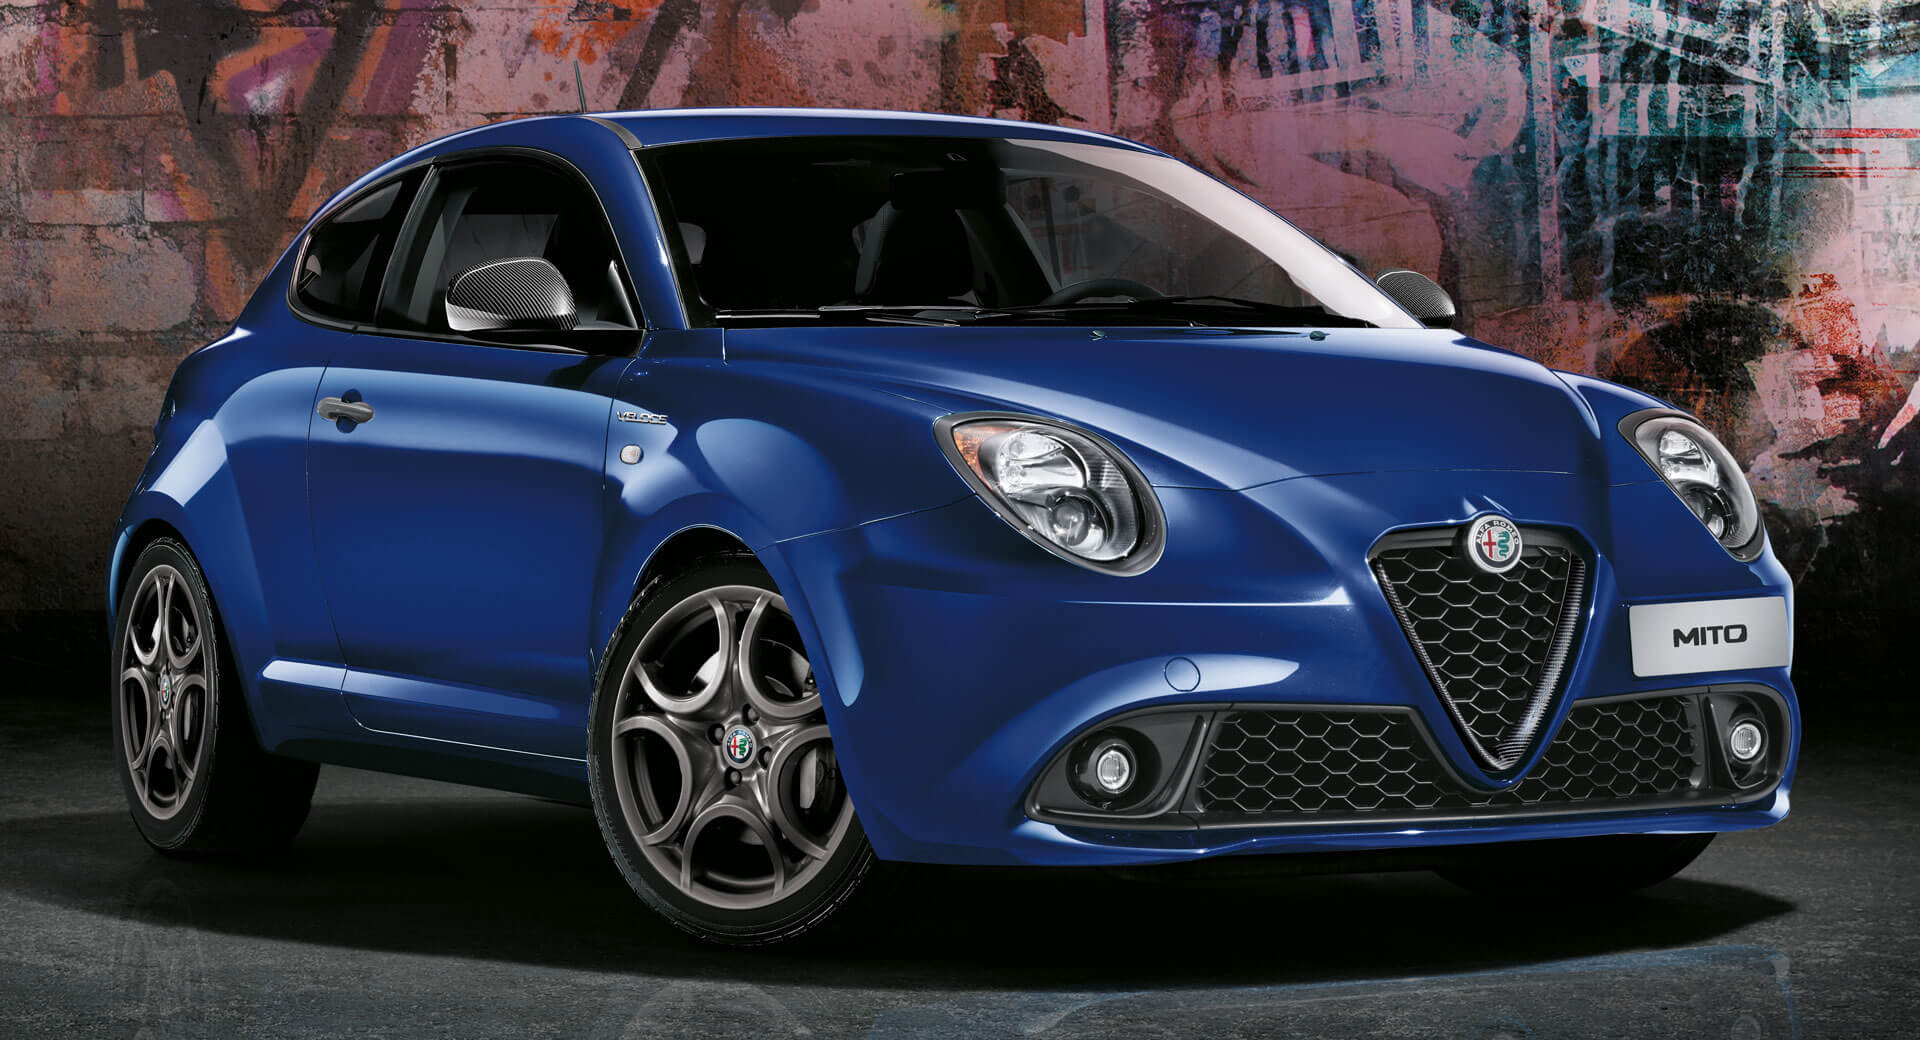 Anzai Voorbeeld Materialisme Alfa Romeo MiTo Shall Die In Early 2019, Be Replaced By Crossover |  Carscoops